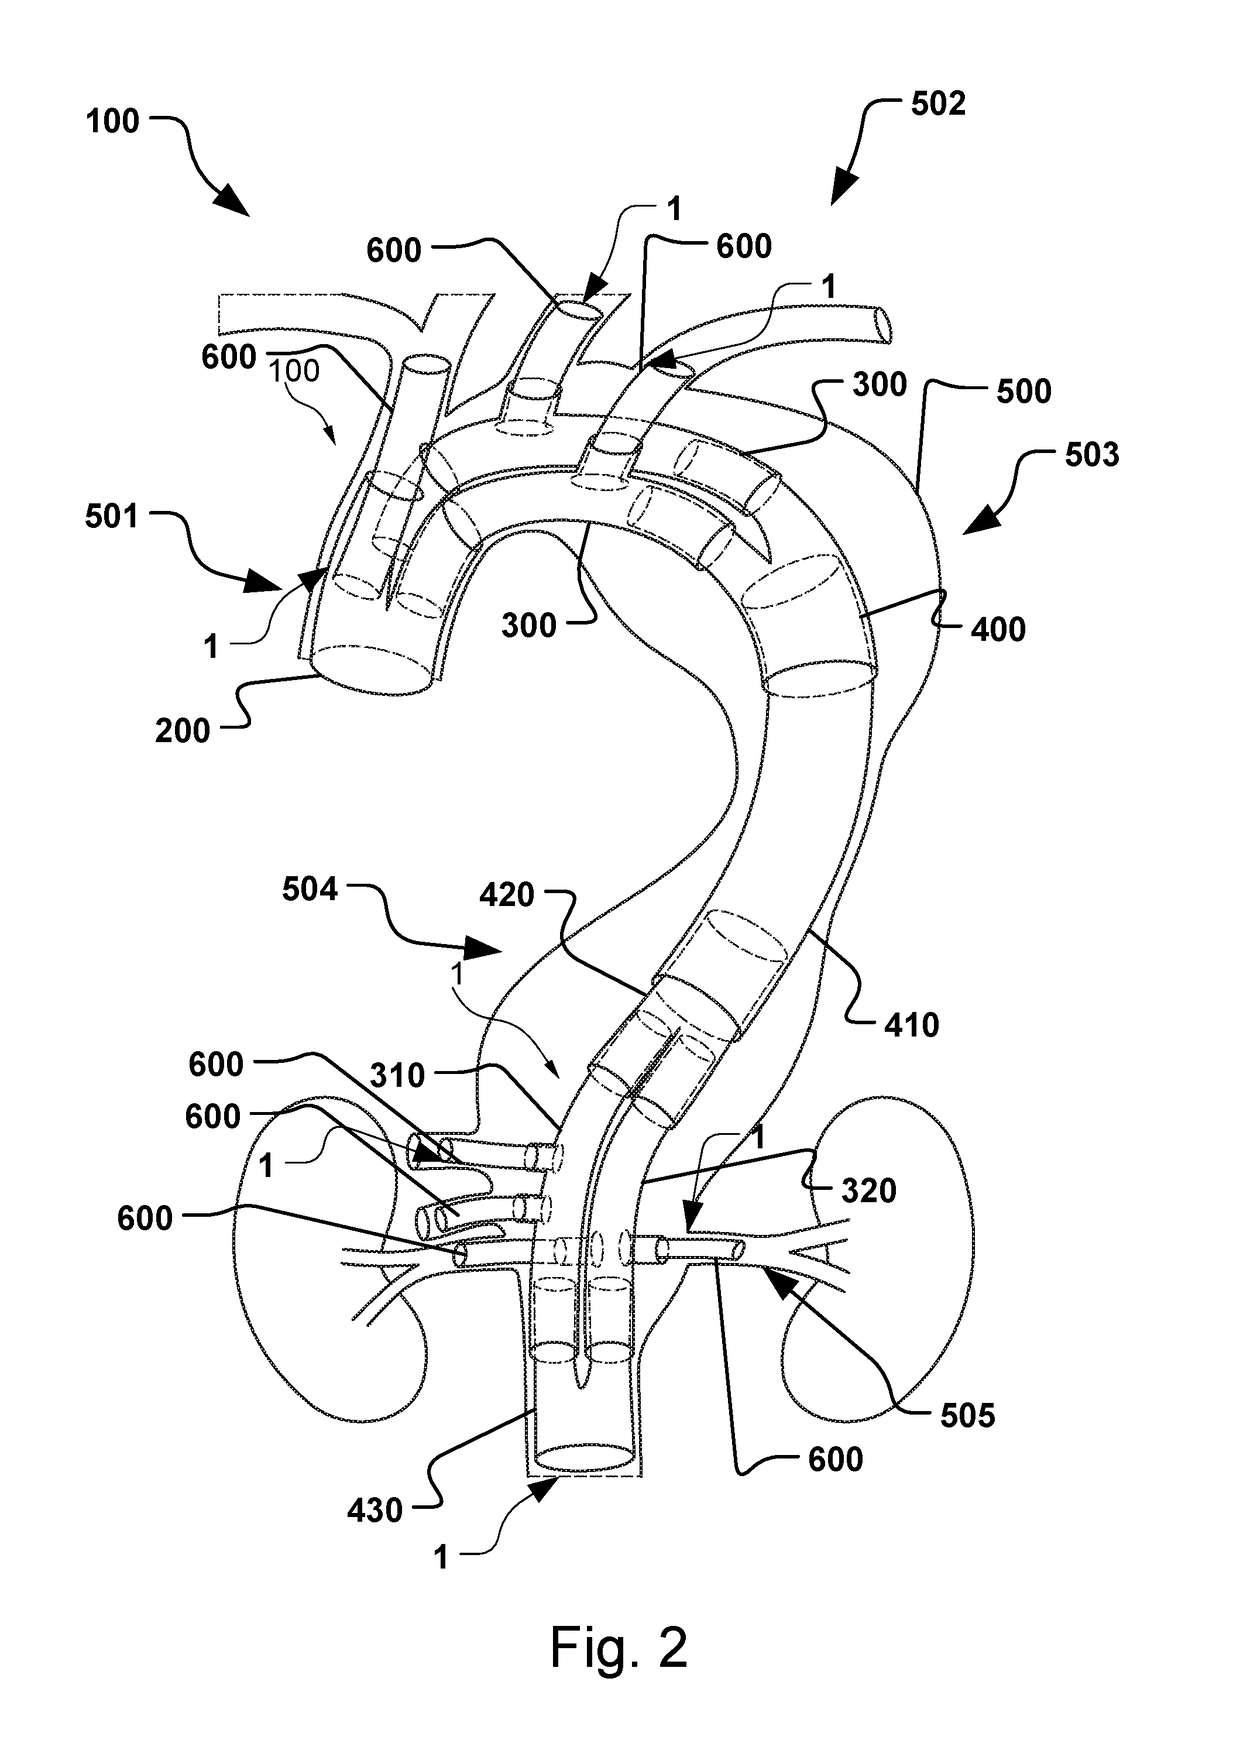 Vascular Medical Device, System And Method